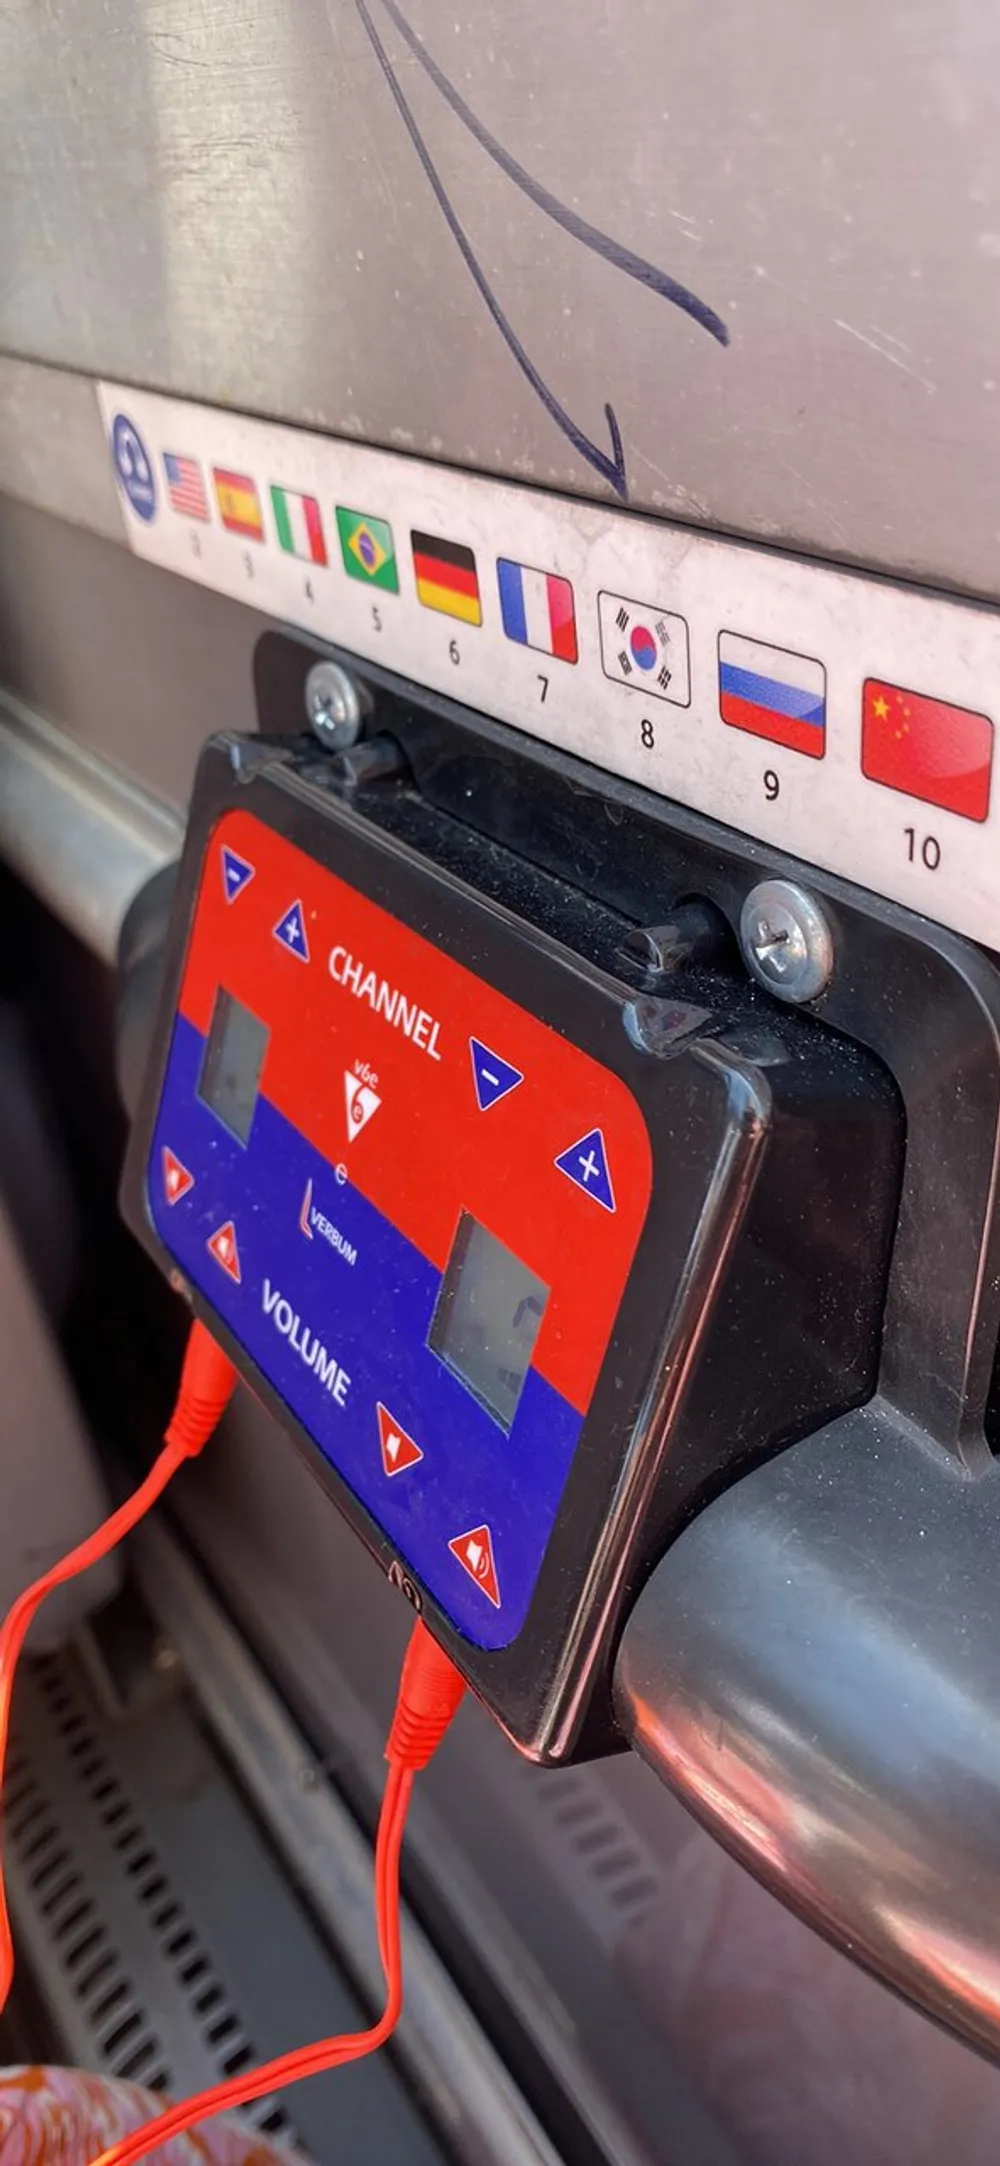 The image shows a close-up of an audio guide device with channel and volume controls attached to a panel with country flags indicating different language options and its connected with an orange cord